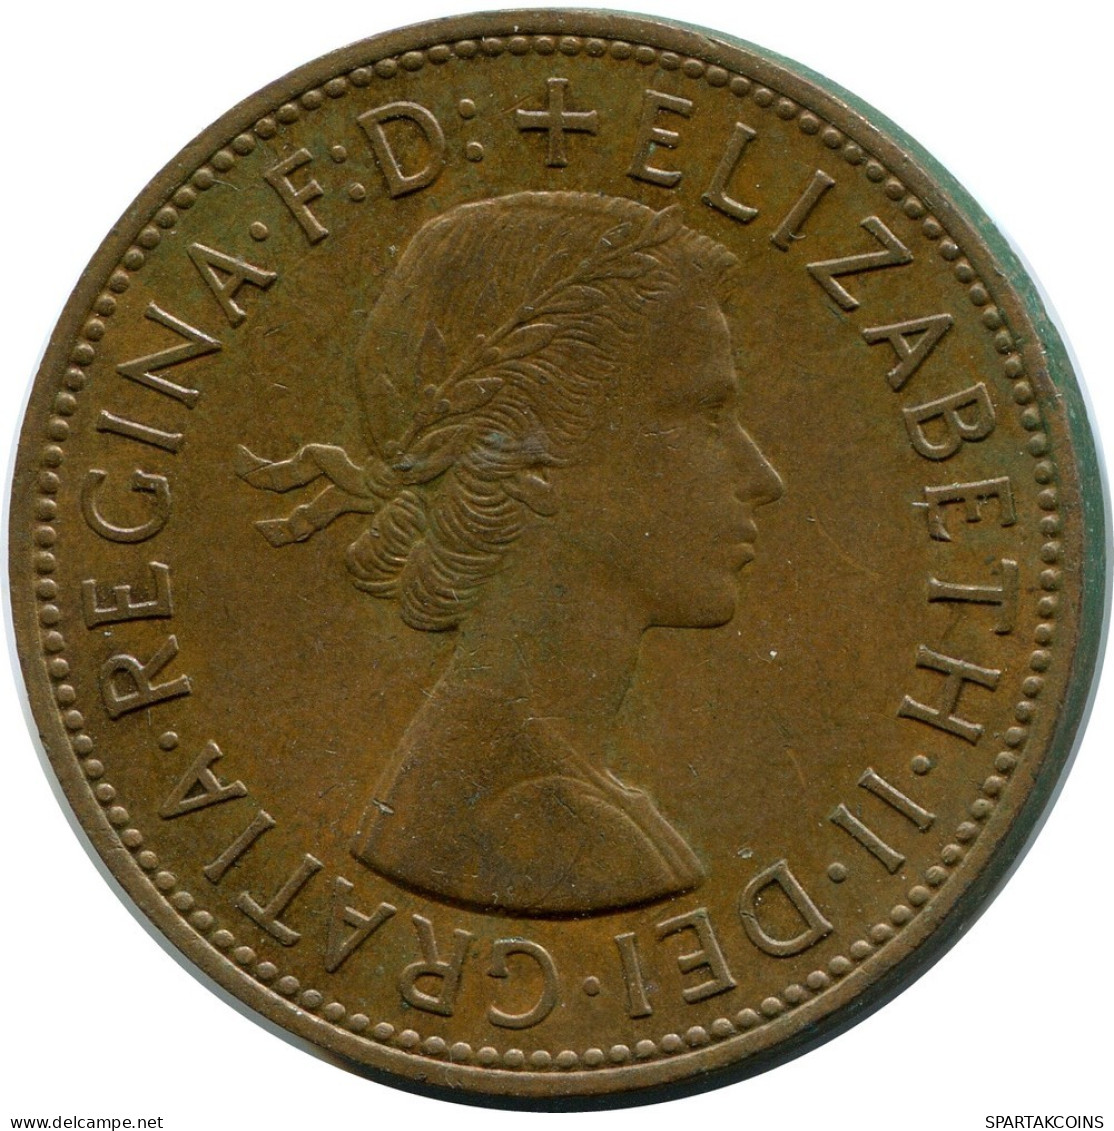 PENNY 1965 UK GREAT BRITAIN Coin #BB035.U.A - D. 1 Penny